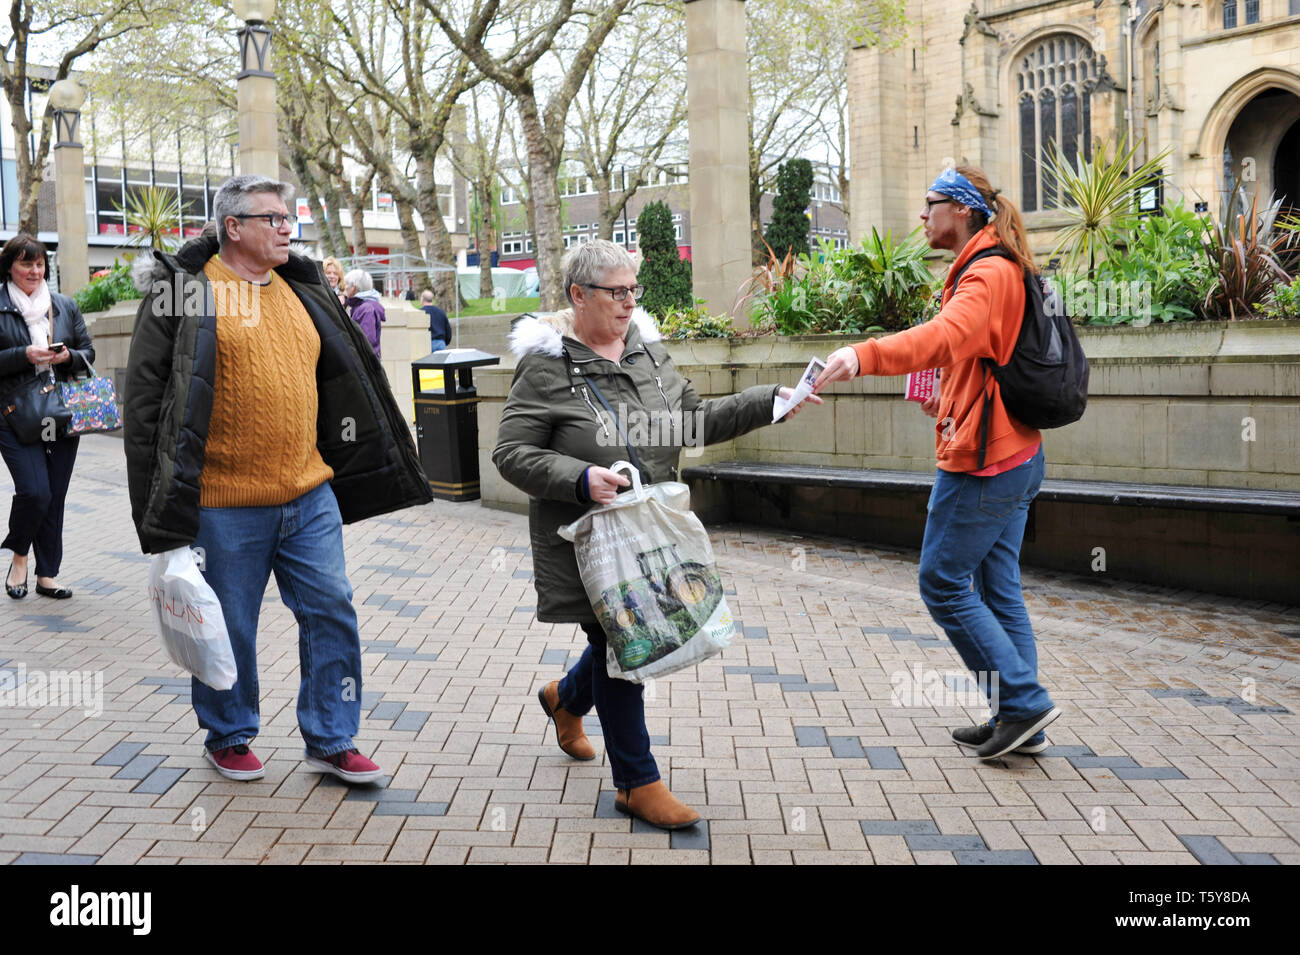 An anti-UKIP protestor giving leaflets to passing shoppers in the city centre ahead of local elections, Wakefield, West Yorkshire, England, UK, 27th April 2019. Stock Photo